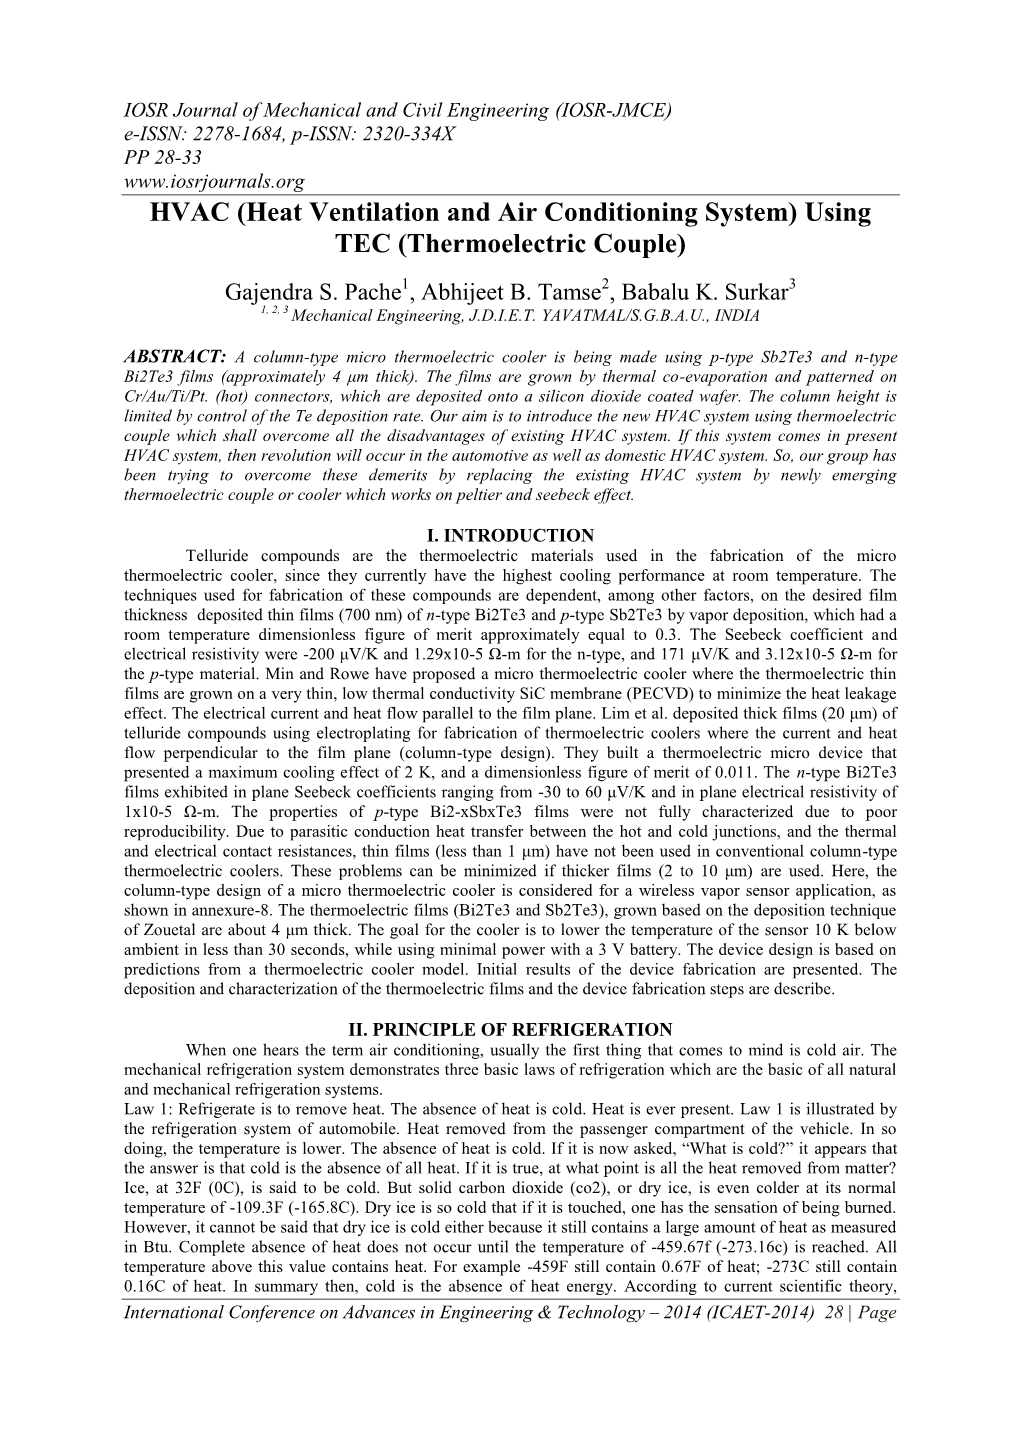 HVAC (Heat Ventilation and Air Conditioning System) Using TEC (Thermoelectric Couple)